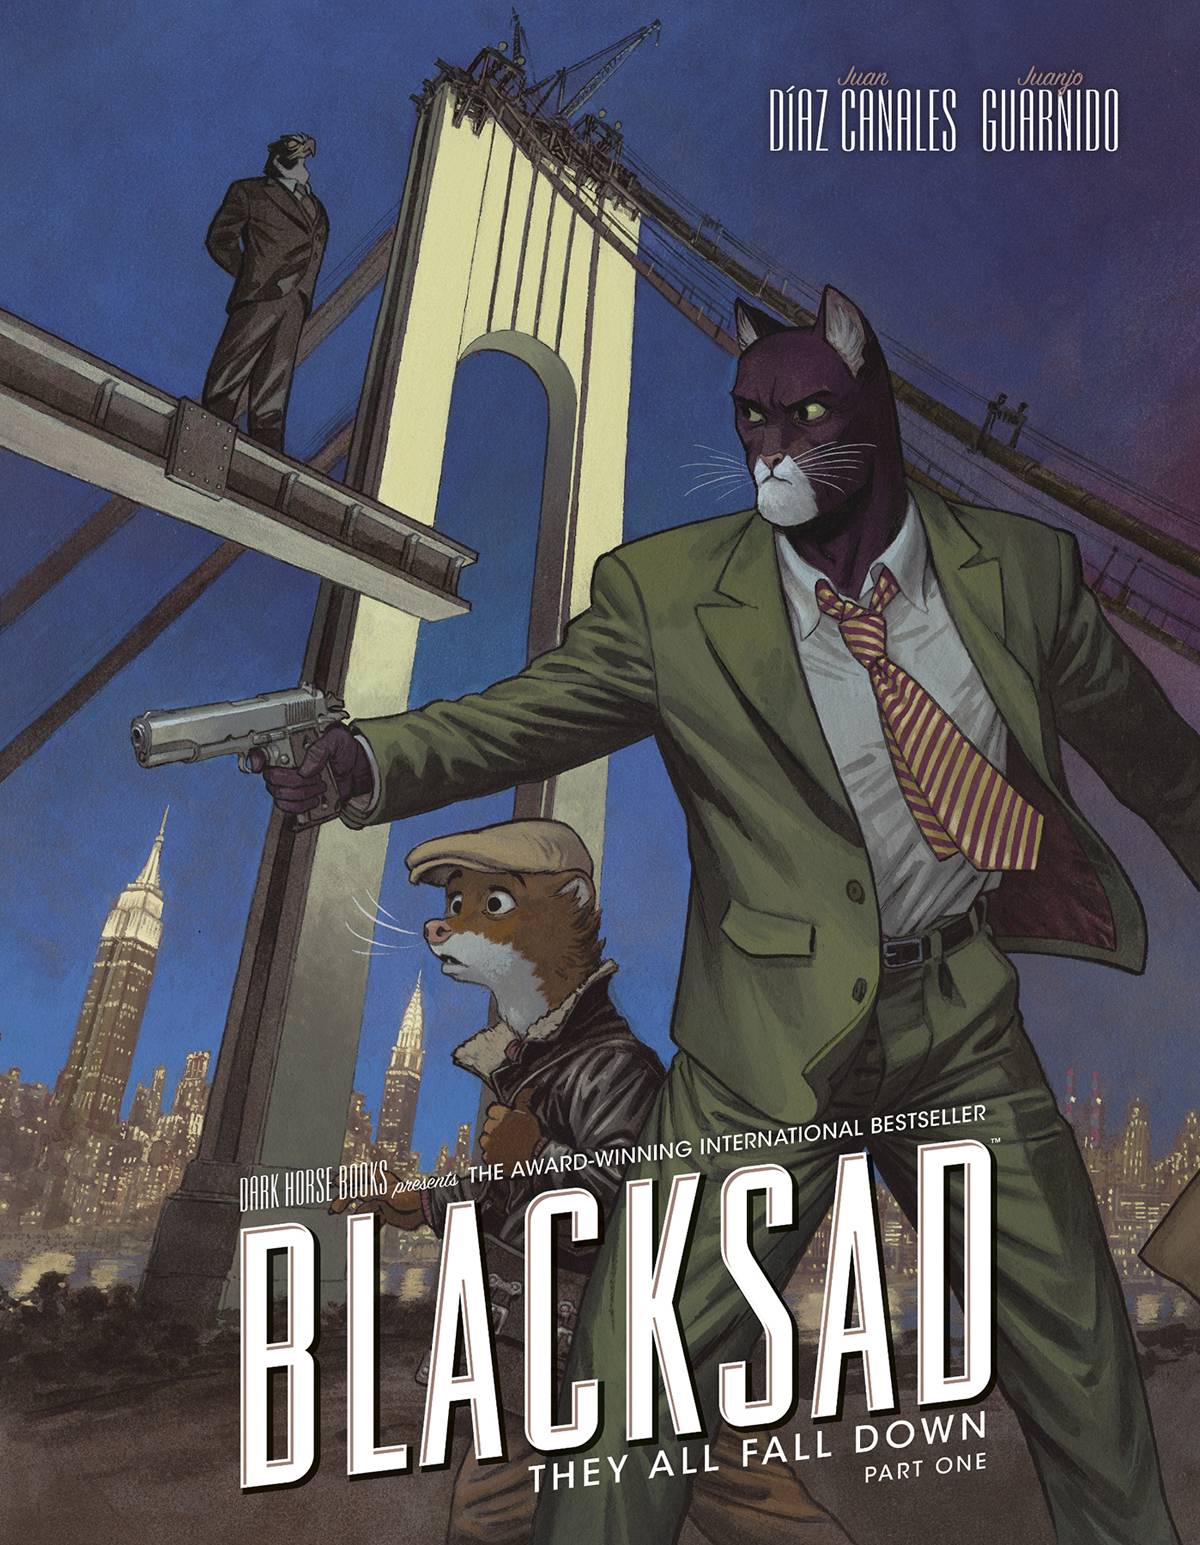 Blacksad: They All Fall Down Part One h/c